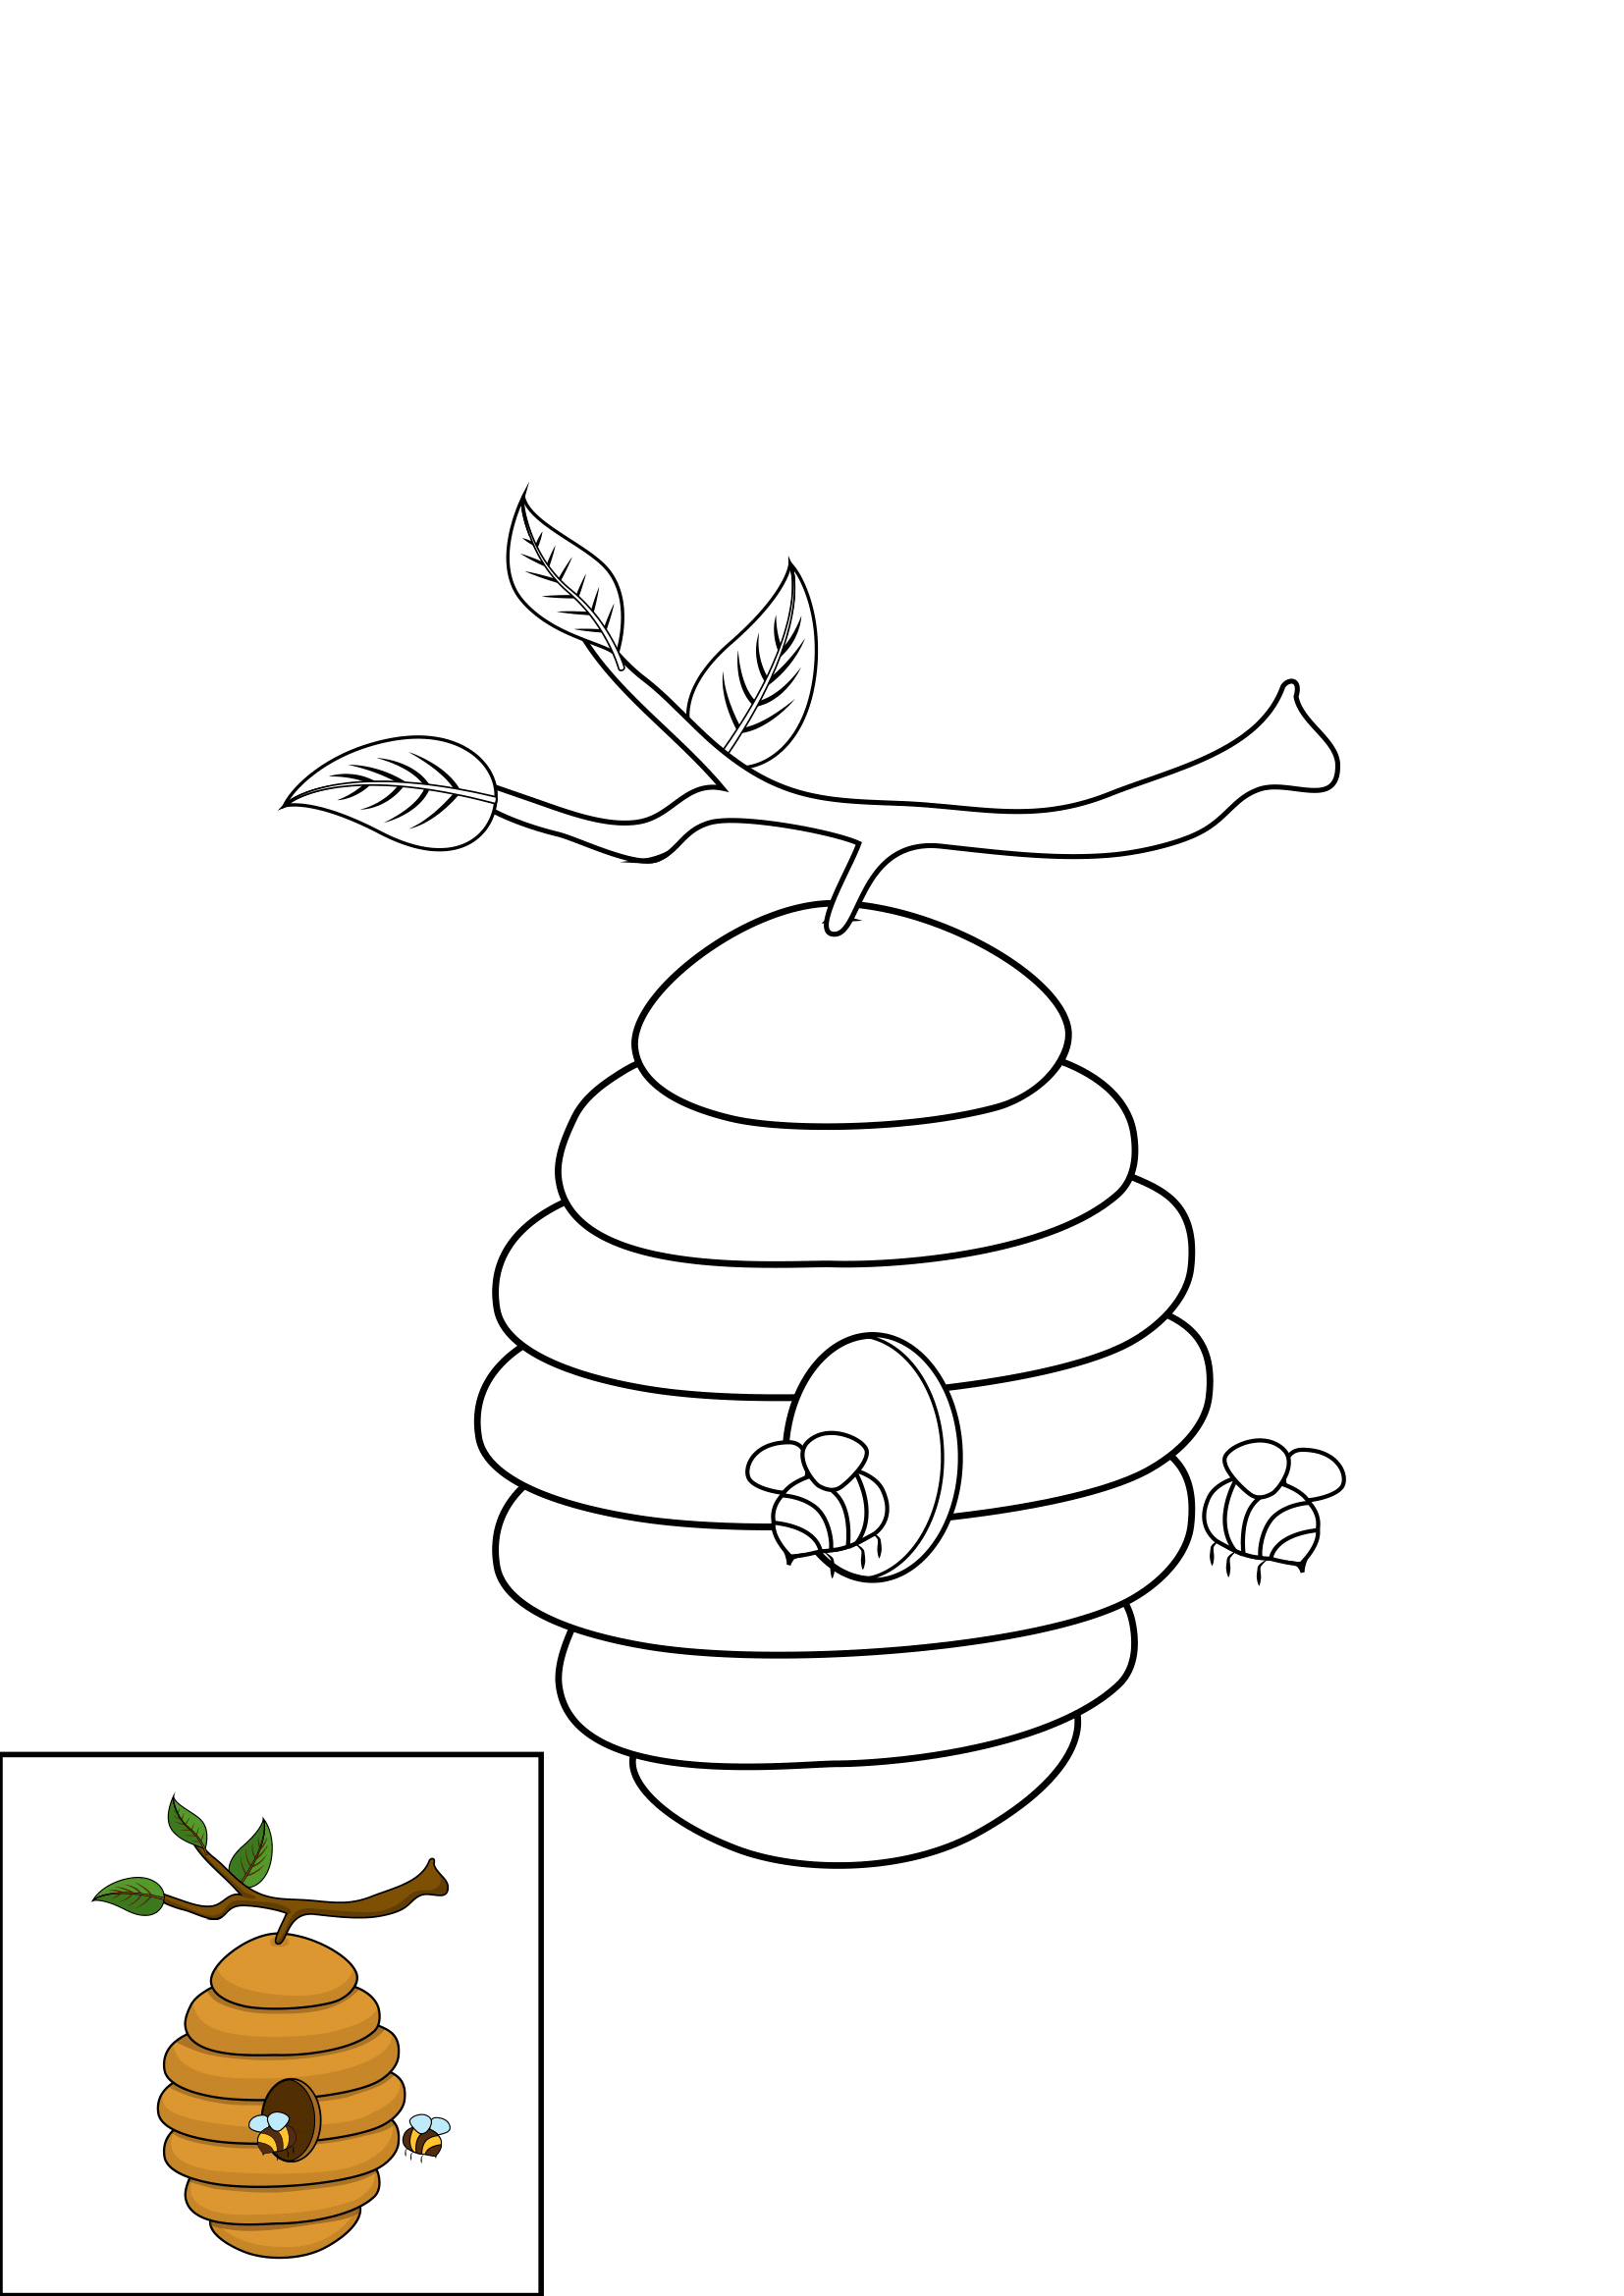 How to Draw A Beehive Step by Step Printable Color